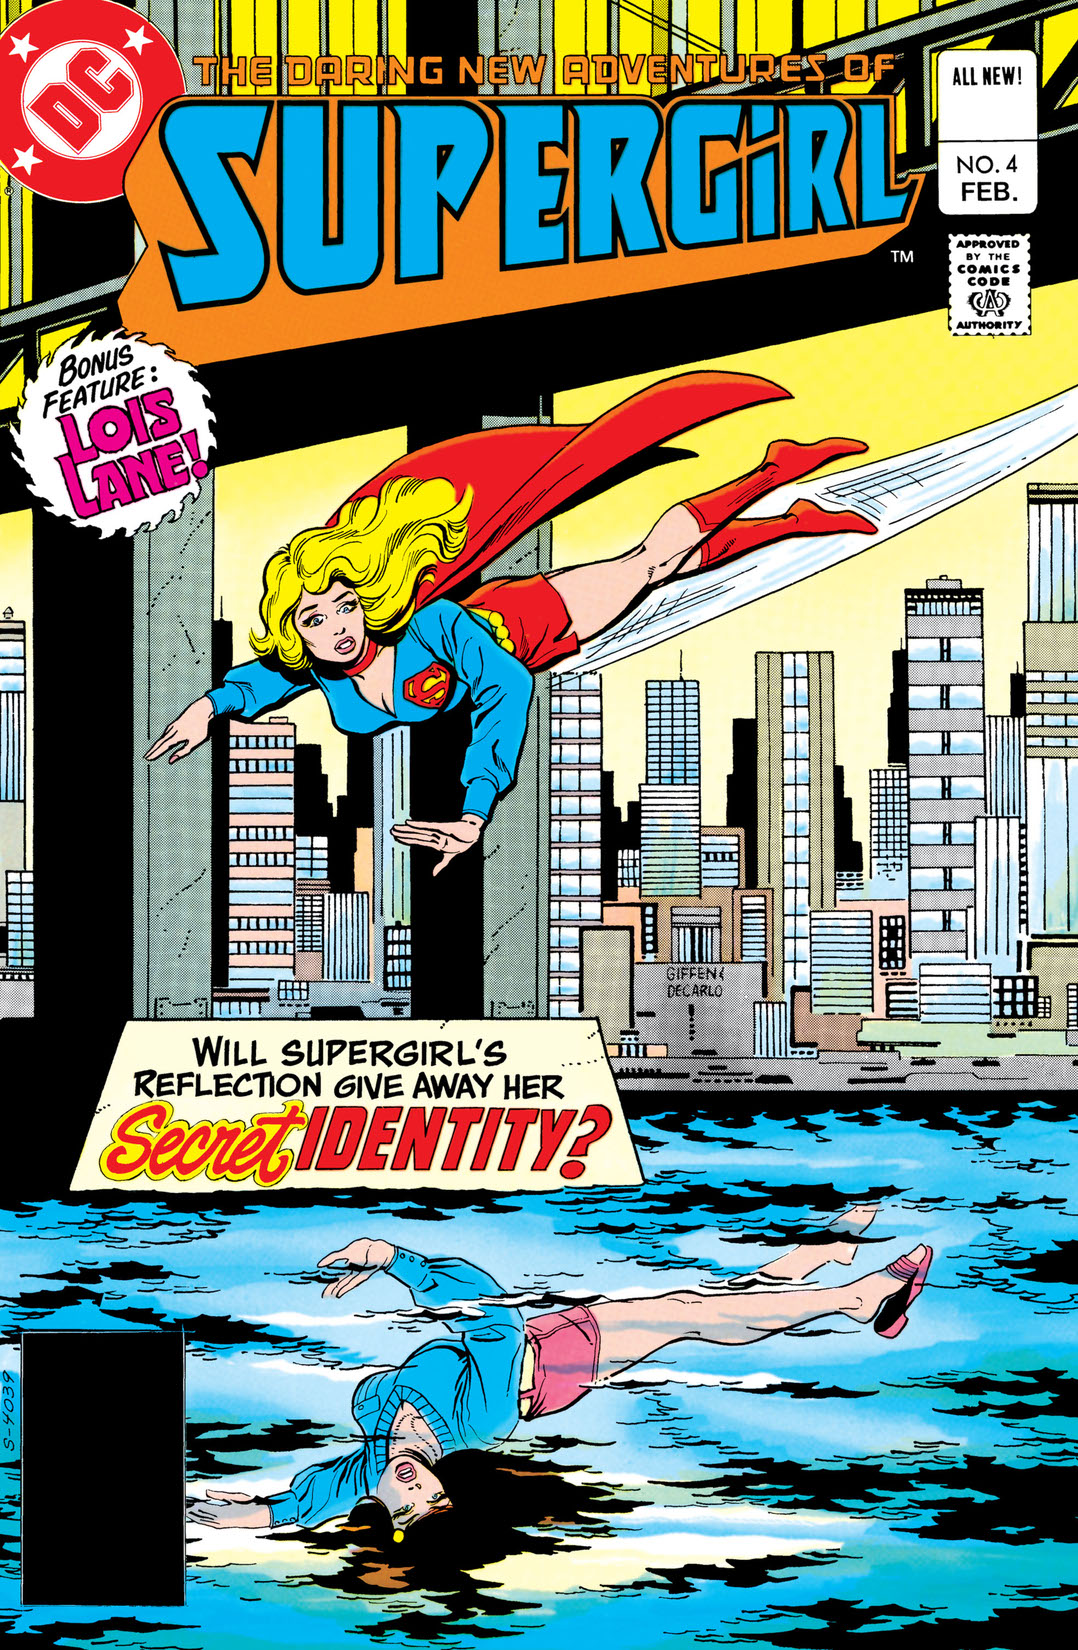 The Daring New Adventures of Supergirl #4 preview images